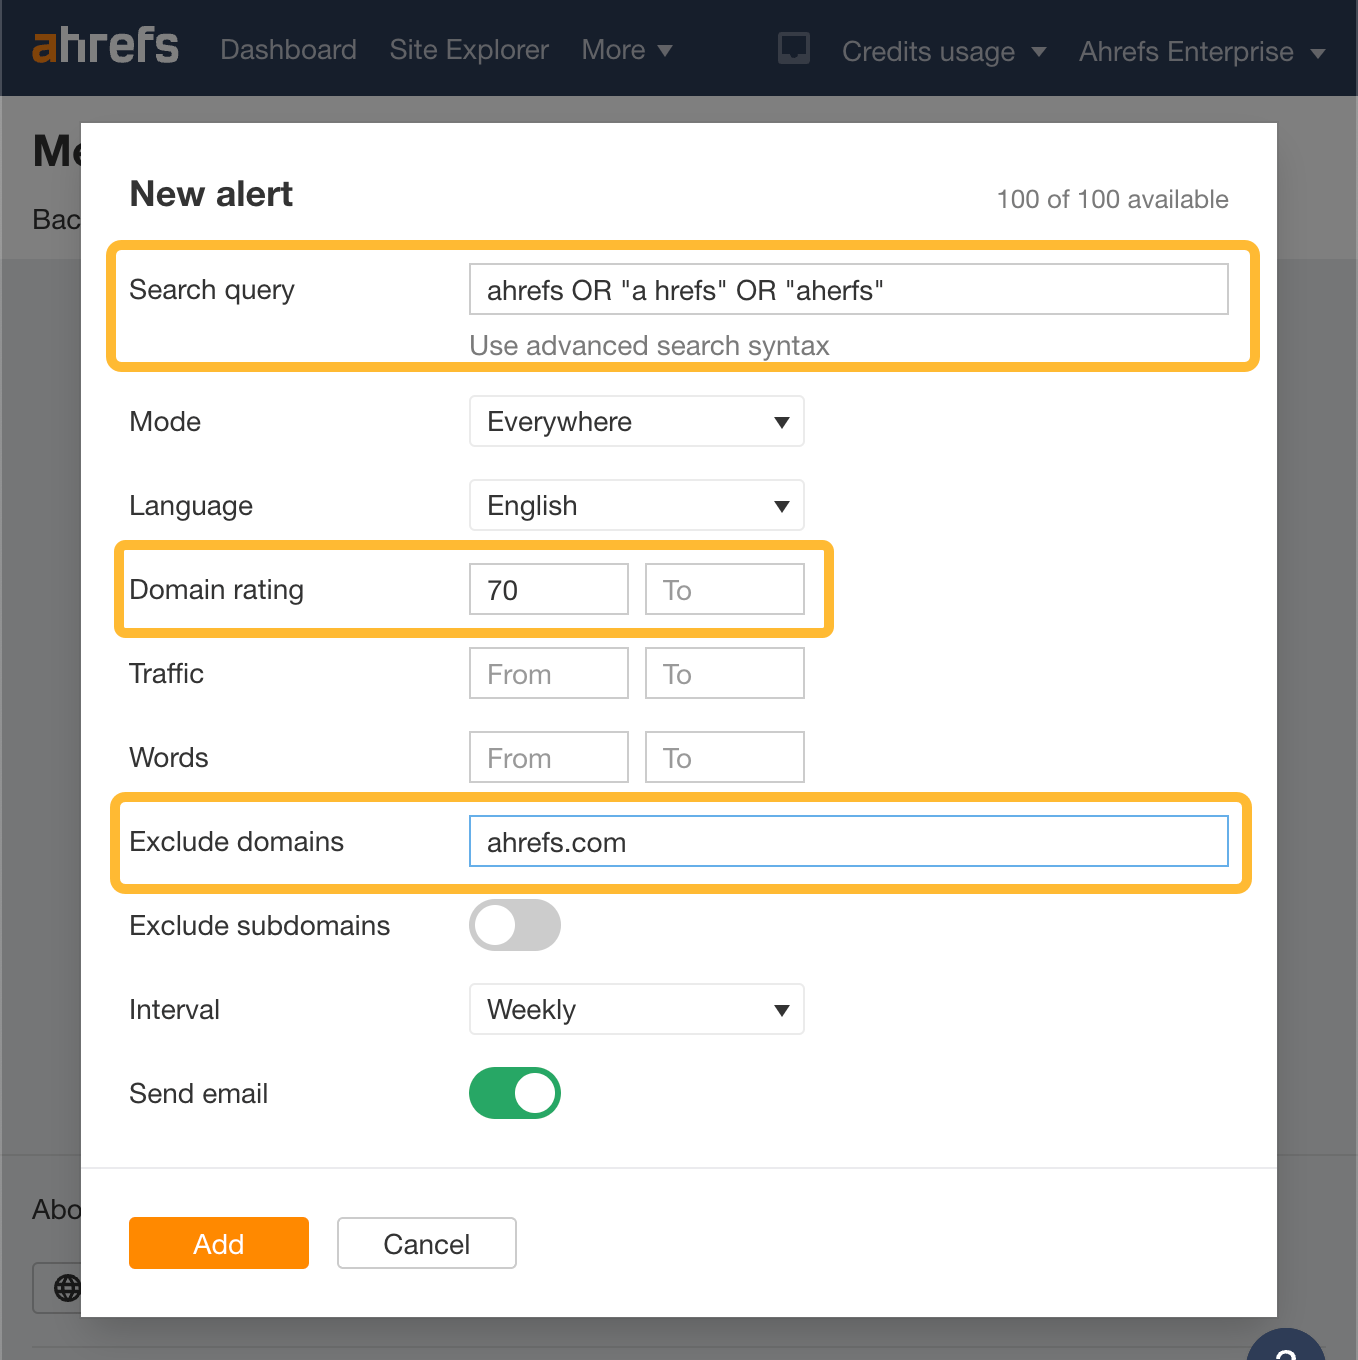 How to set up Ahrefs alerts for brand mentions